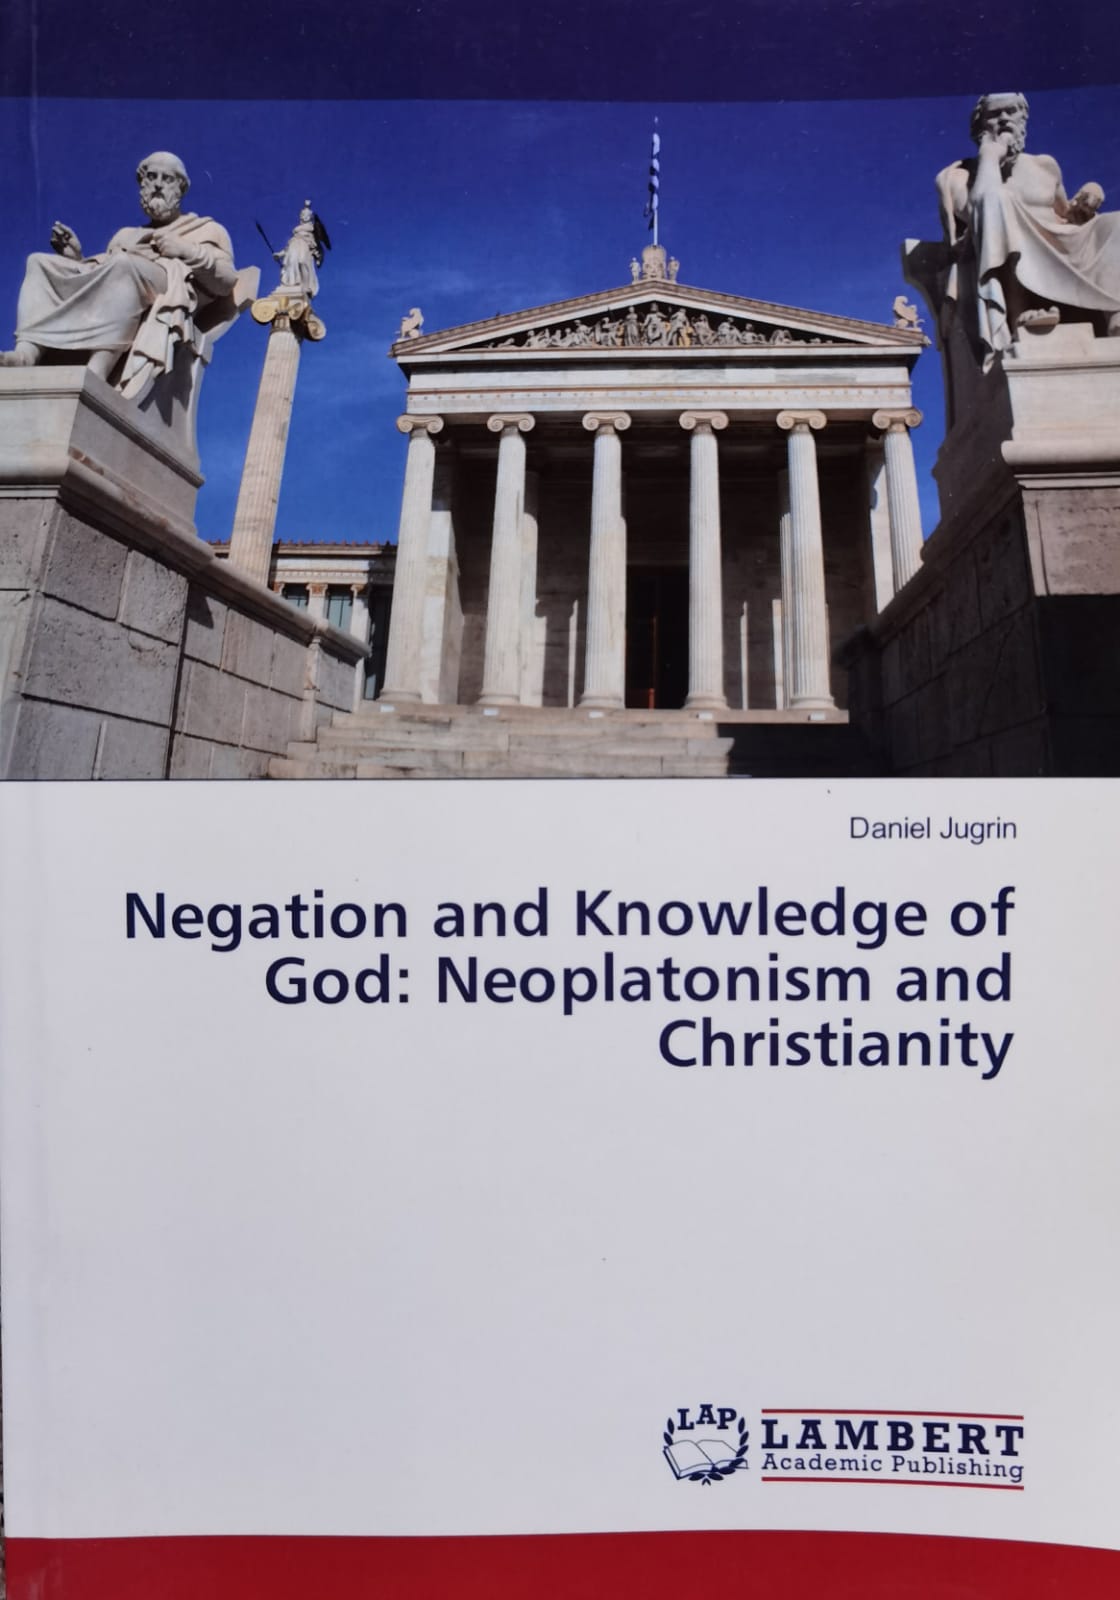 negation and knowledge of god: neoplatonism and christianity                                         danie jugrin                                                                                        